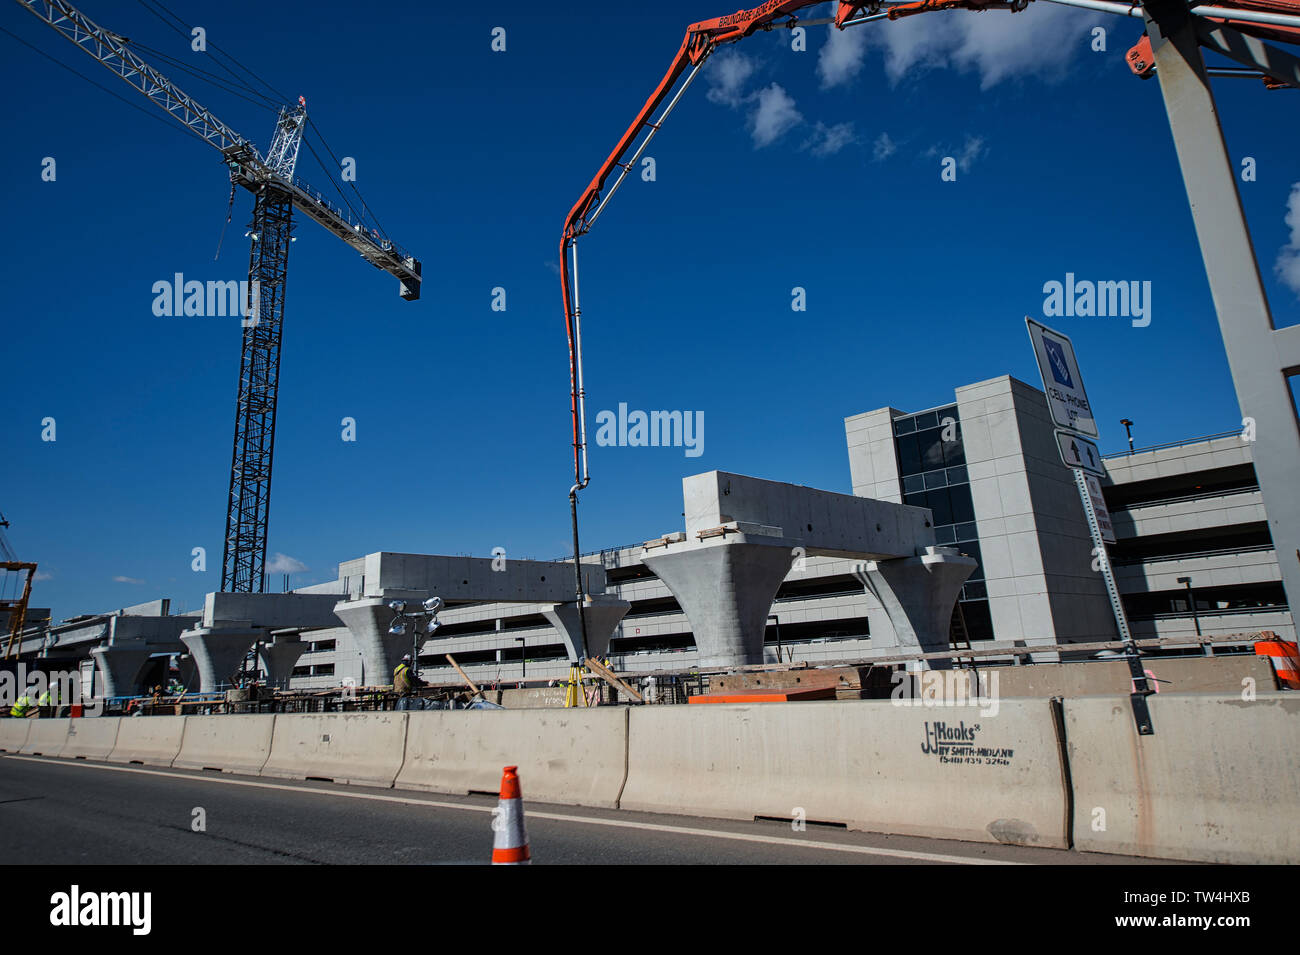 UNITED STATES - 02-13-2017: Future Metro Dulles Station at  Dulles International Airport. The Metro Silver Line’s capital costs are almost double what Stock Photo